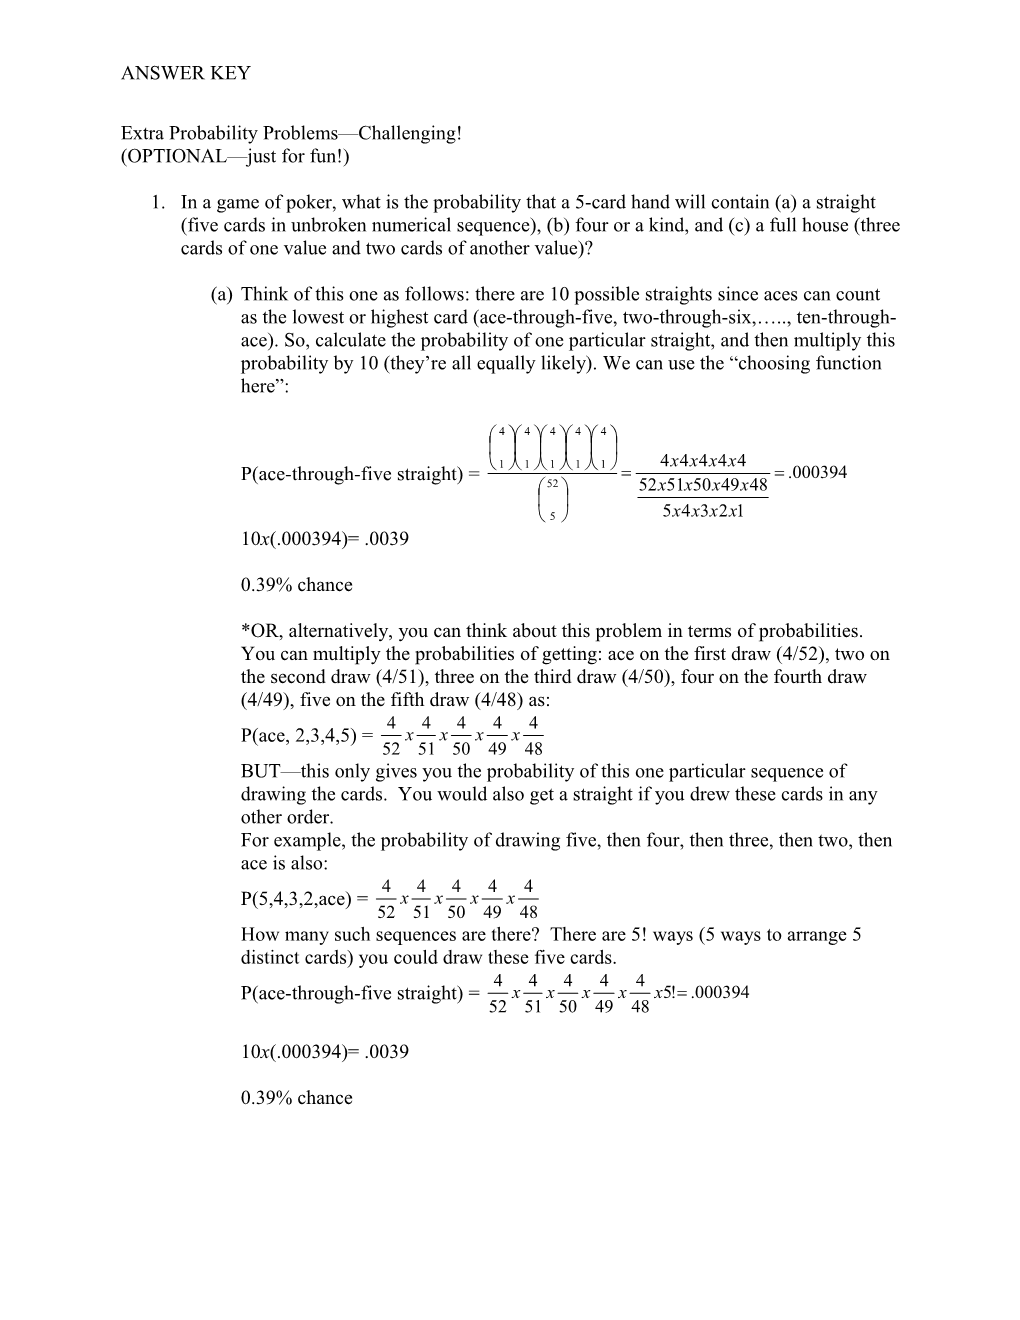 Extra Probability Problems (OPTIONAL Just for Fun